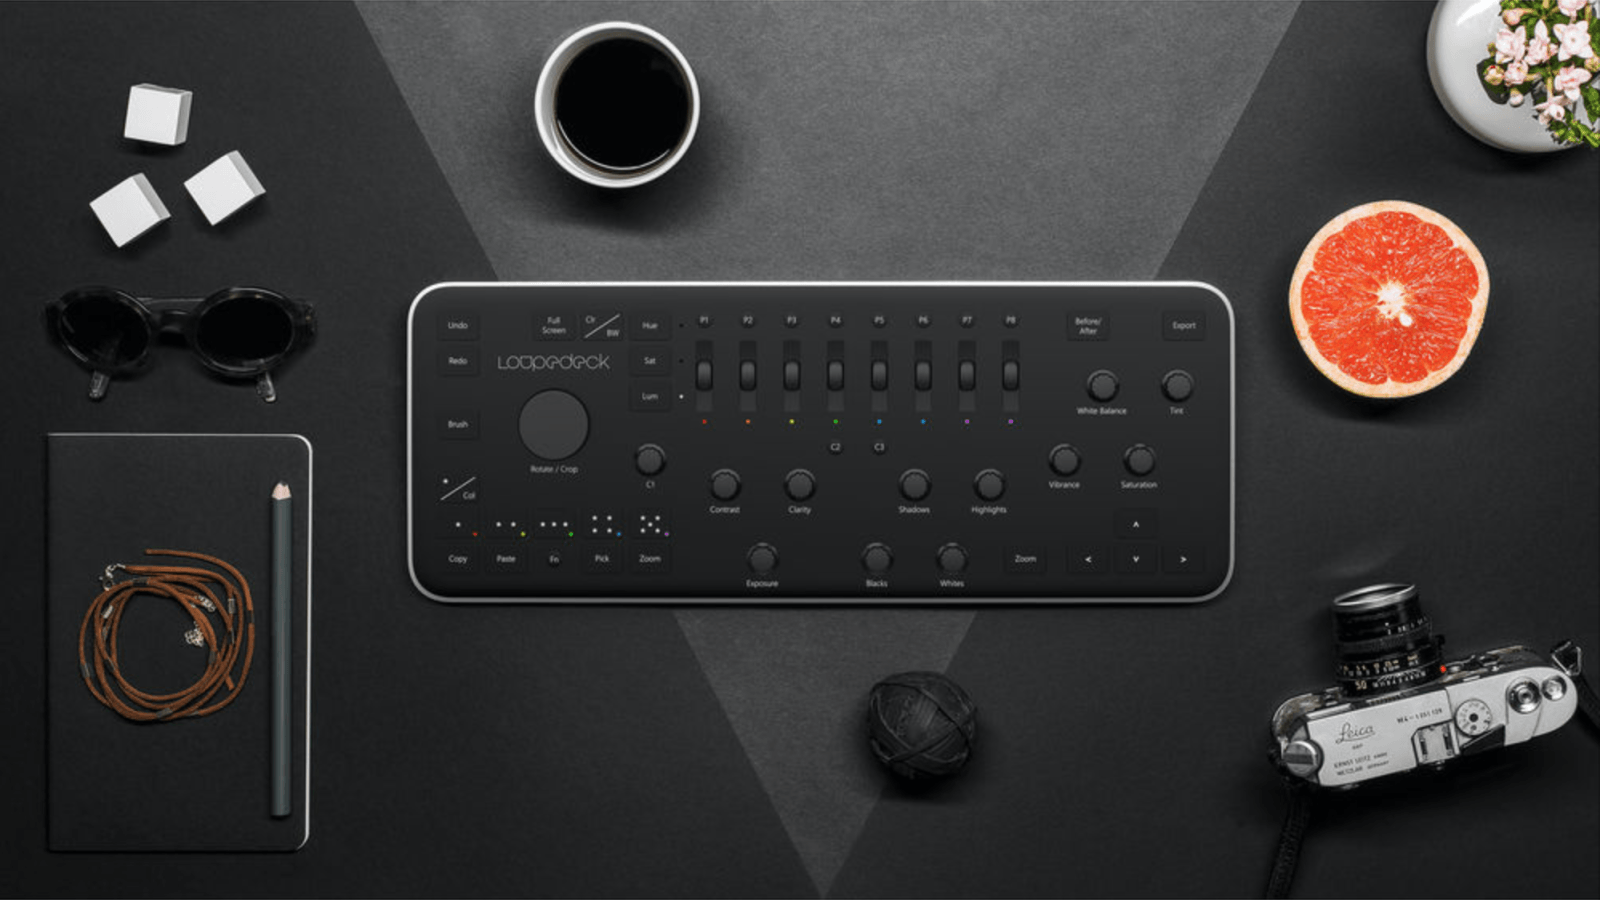 Loupedeck is now available in the UK - Editors Keys